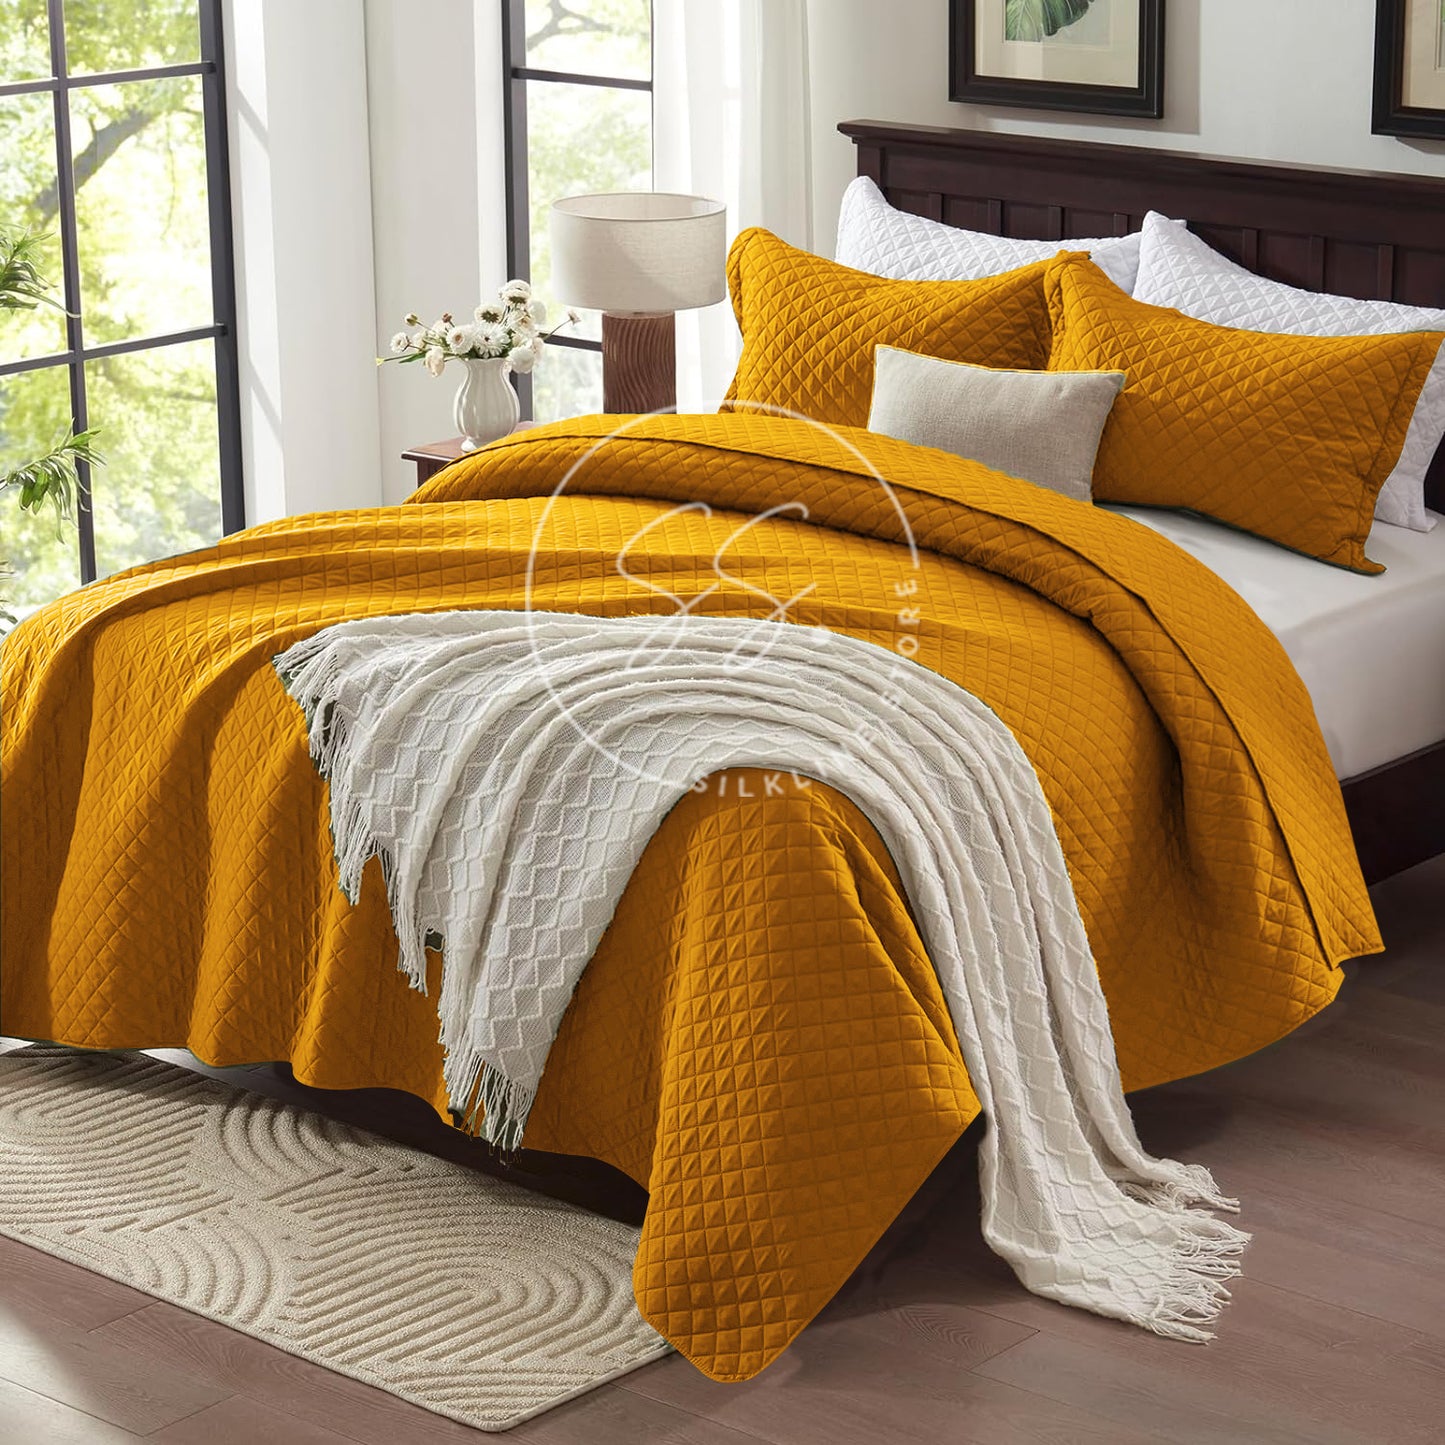 Ochre - king Size Microfibre: Quilted 3 pcs bedspread set